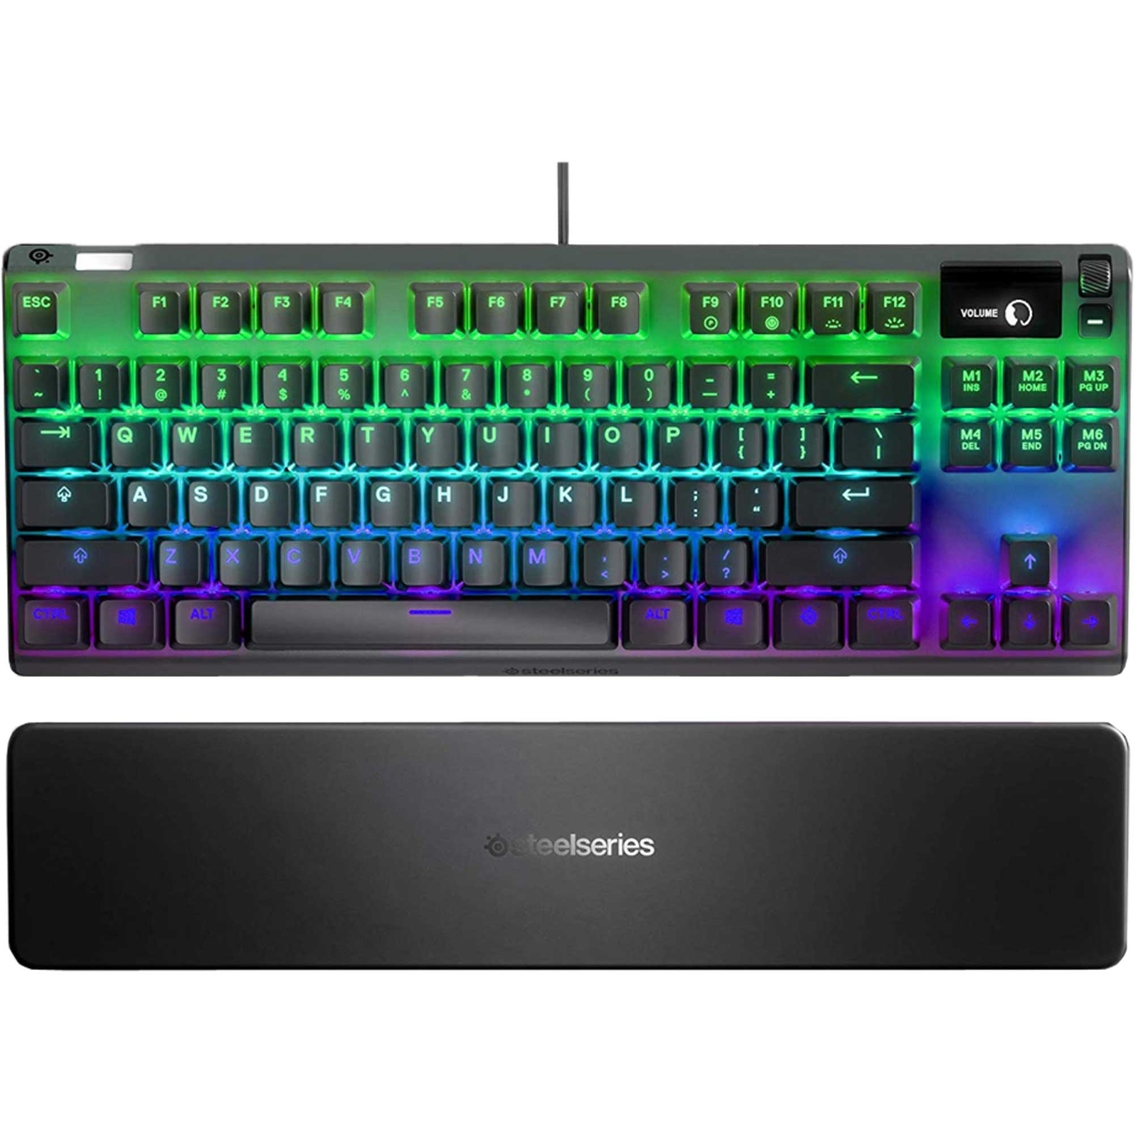 SteelSeries Apex 7 TKL Wired Gaming Mechanical Blue Switch Keyboard - Image 3 of 3